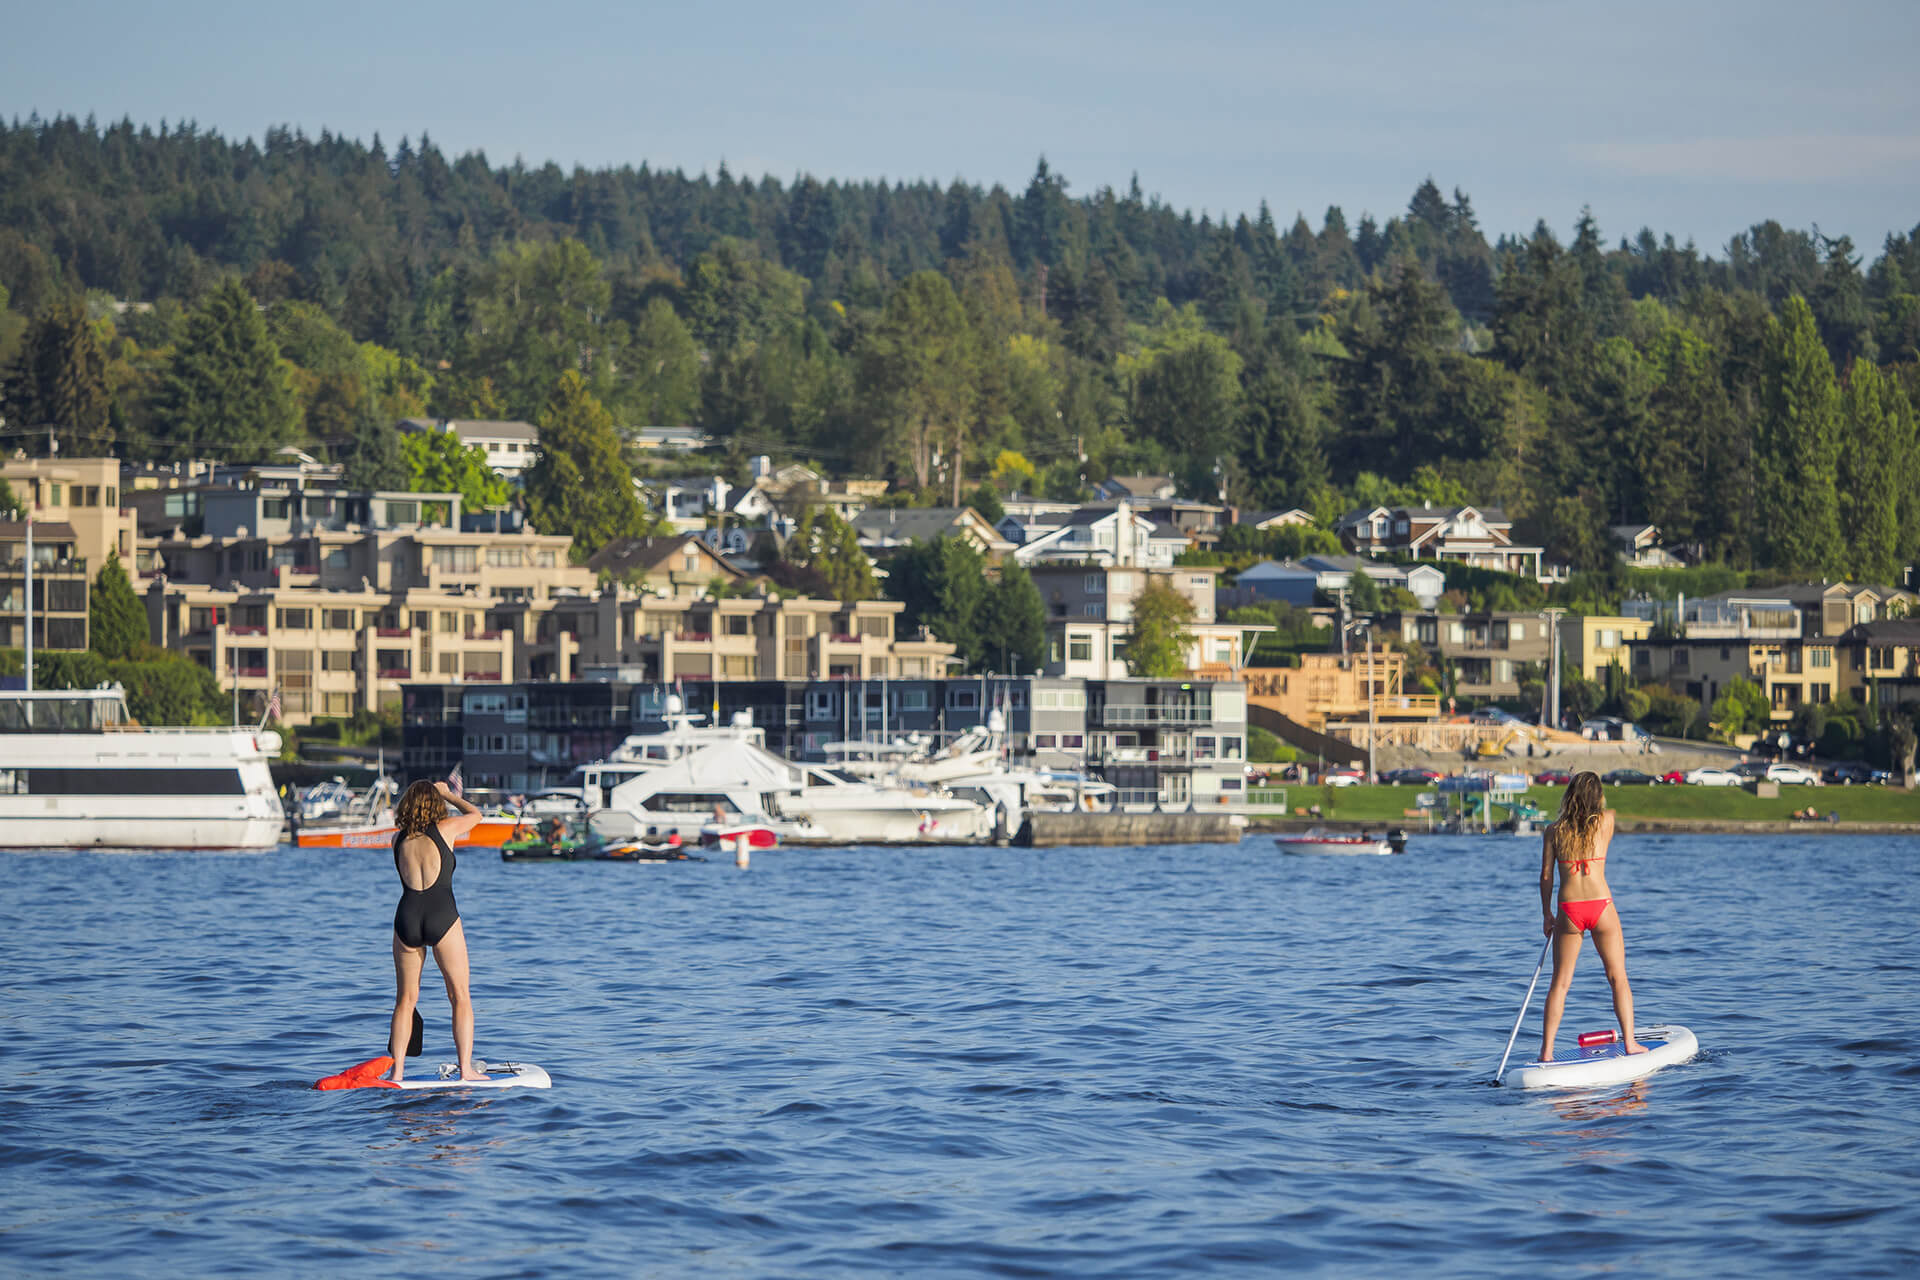 You will never be bored in Kirkland